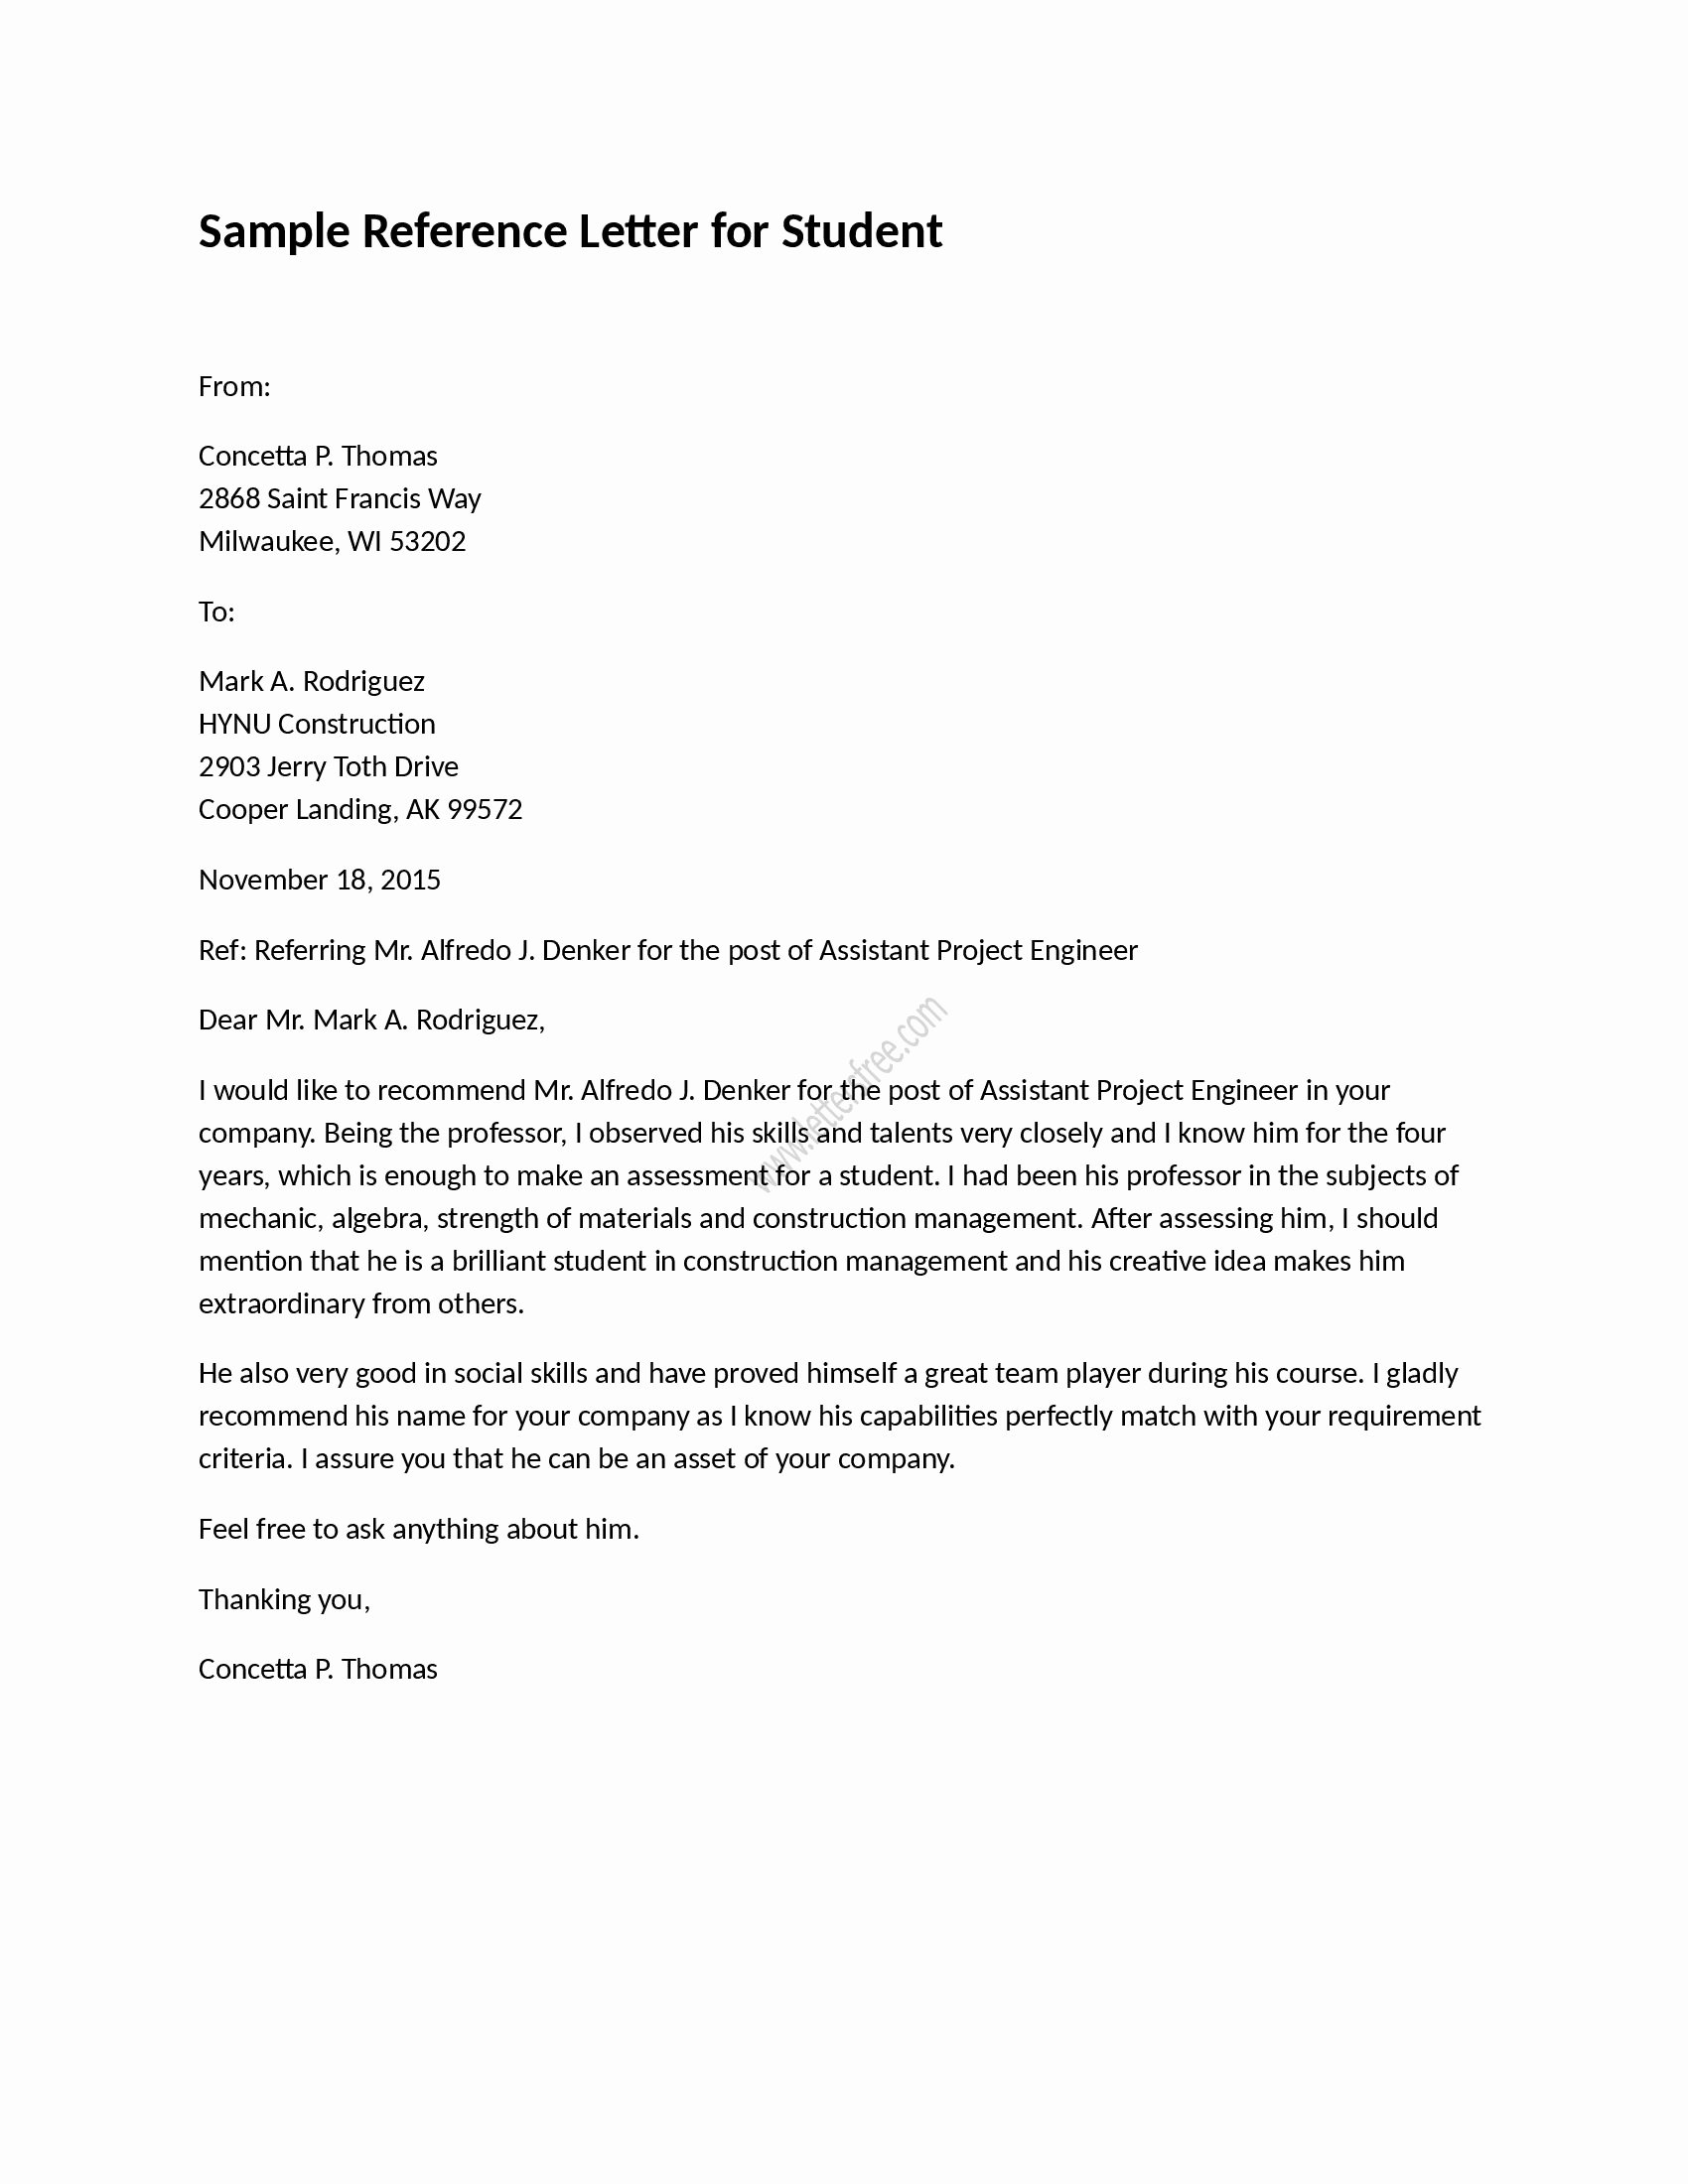 Recommendation Letter format for Student Elegant Sample Reference Letter for Student is Written to Refer A